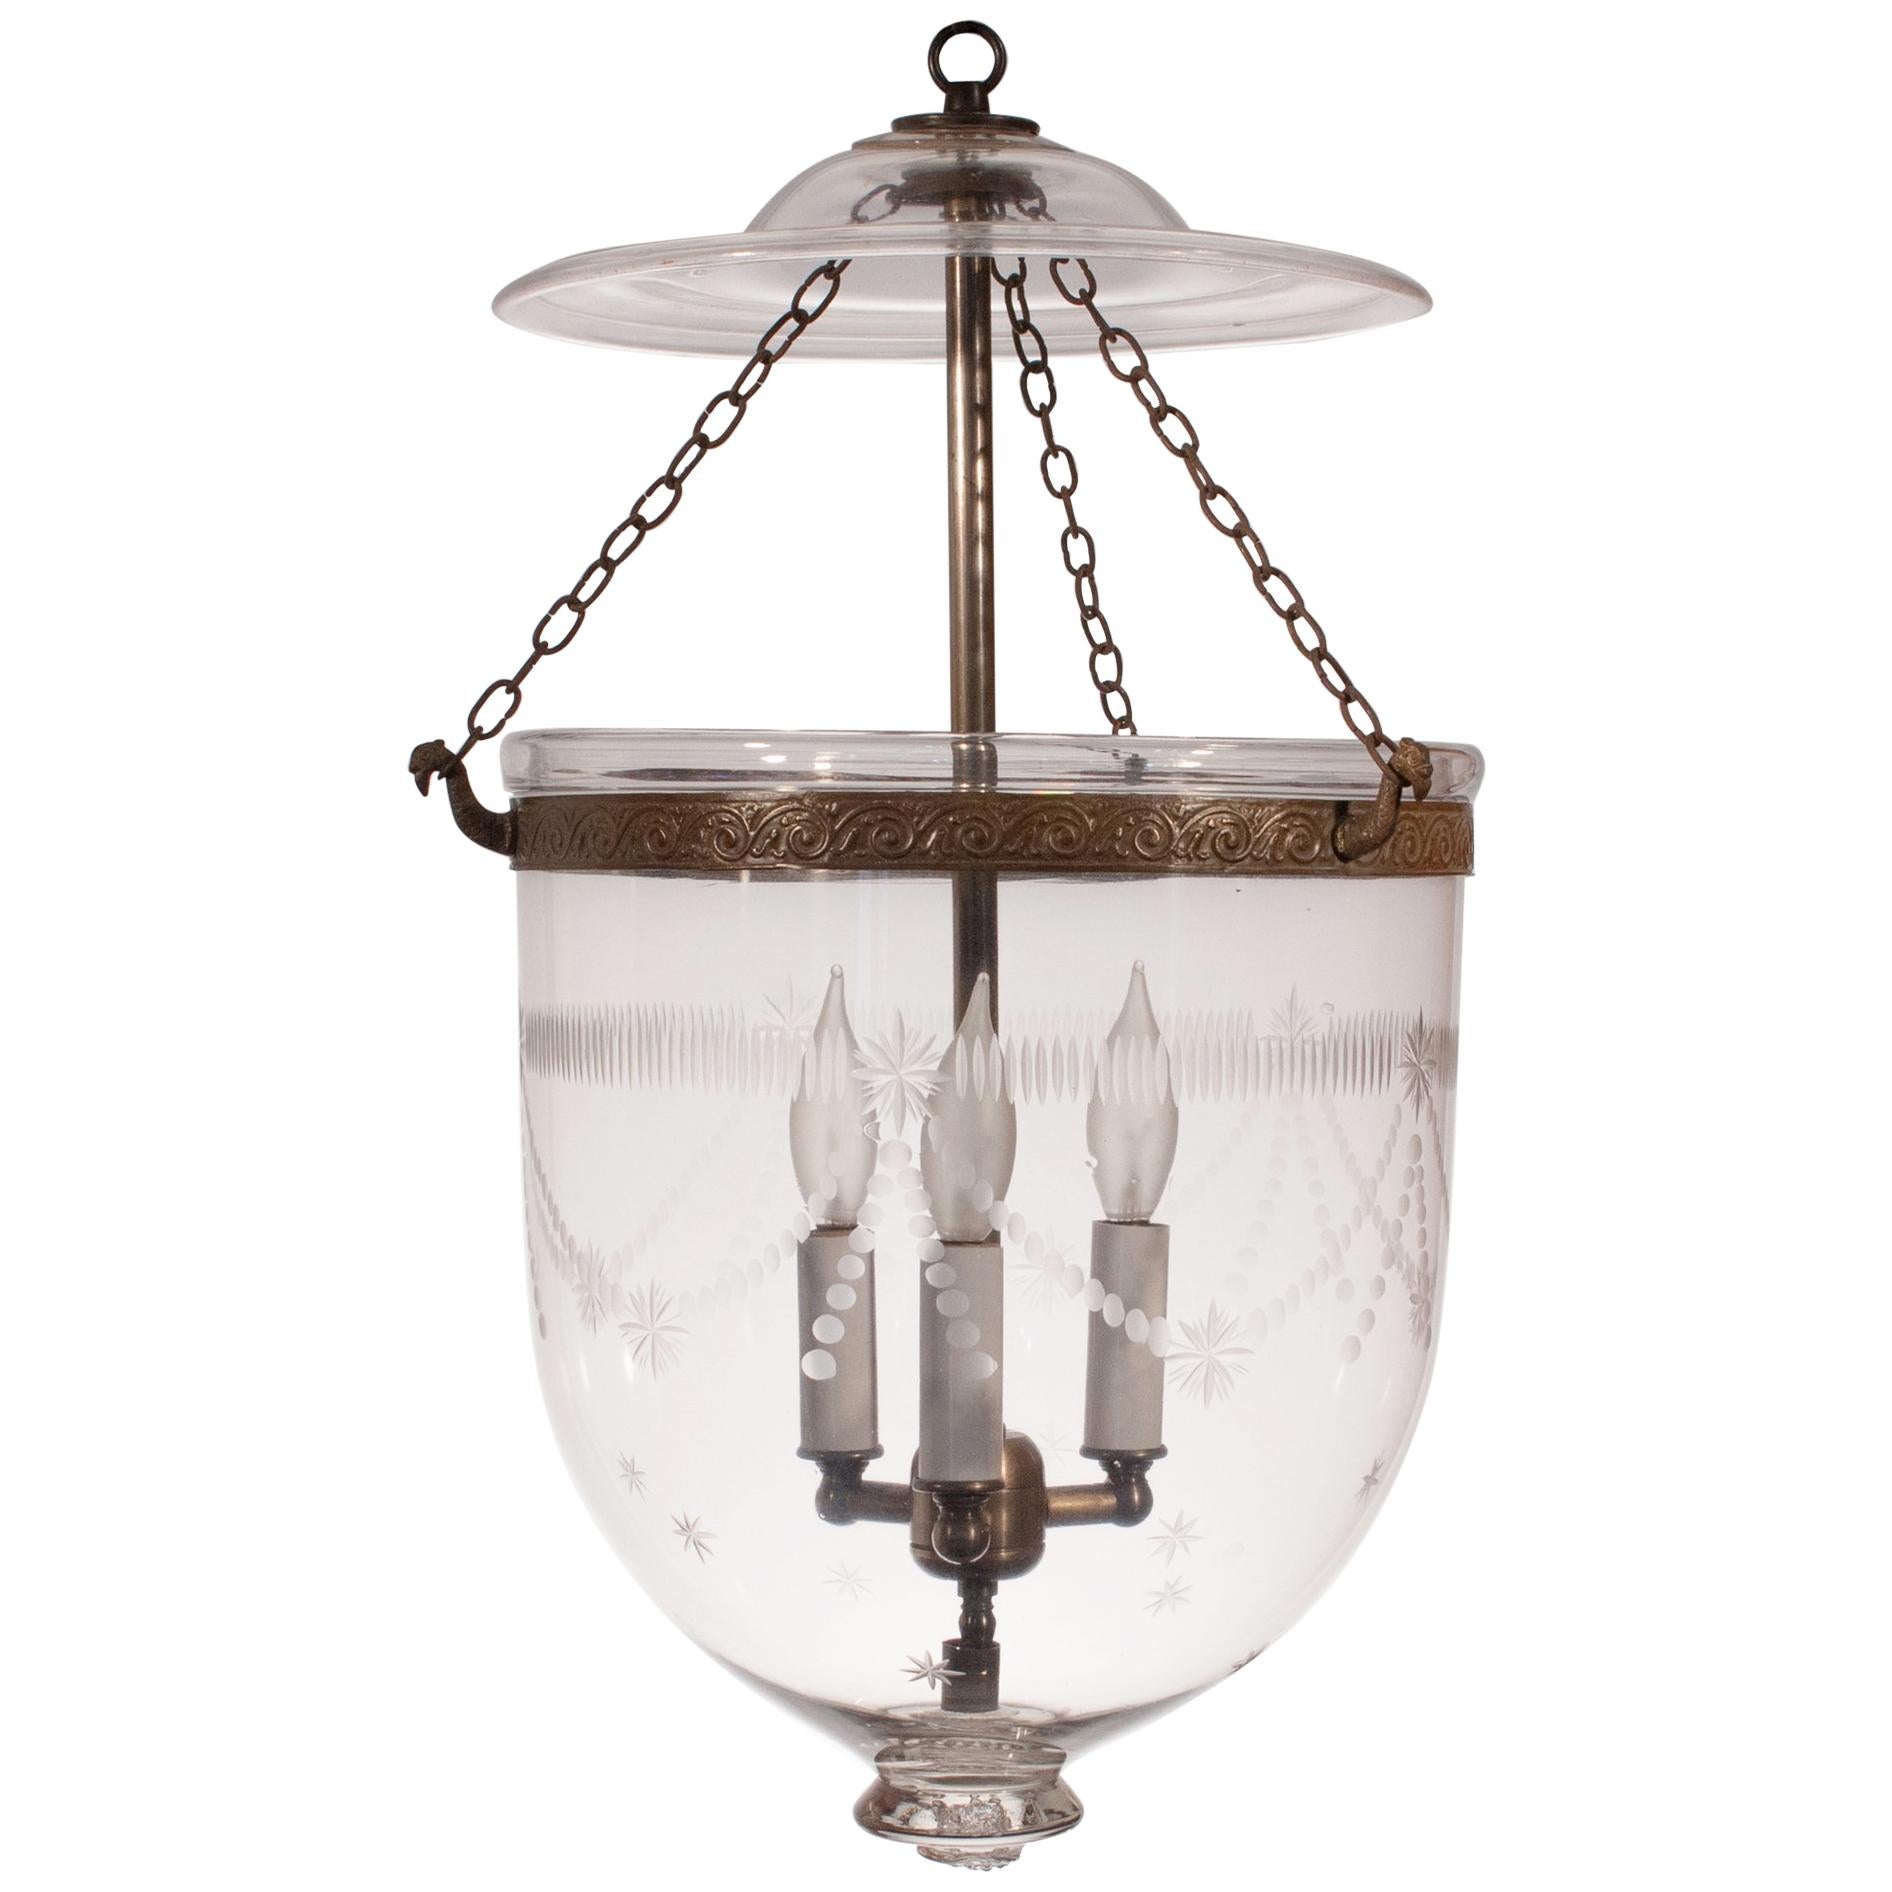 19th Century Bell Jar Lantern with Federal Etching